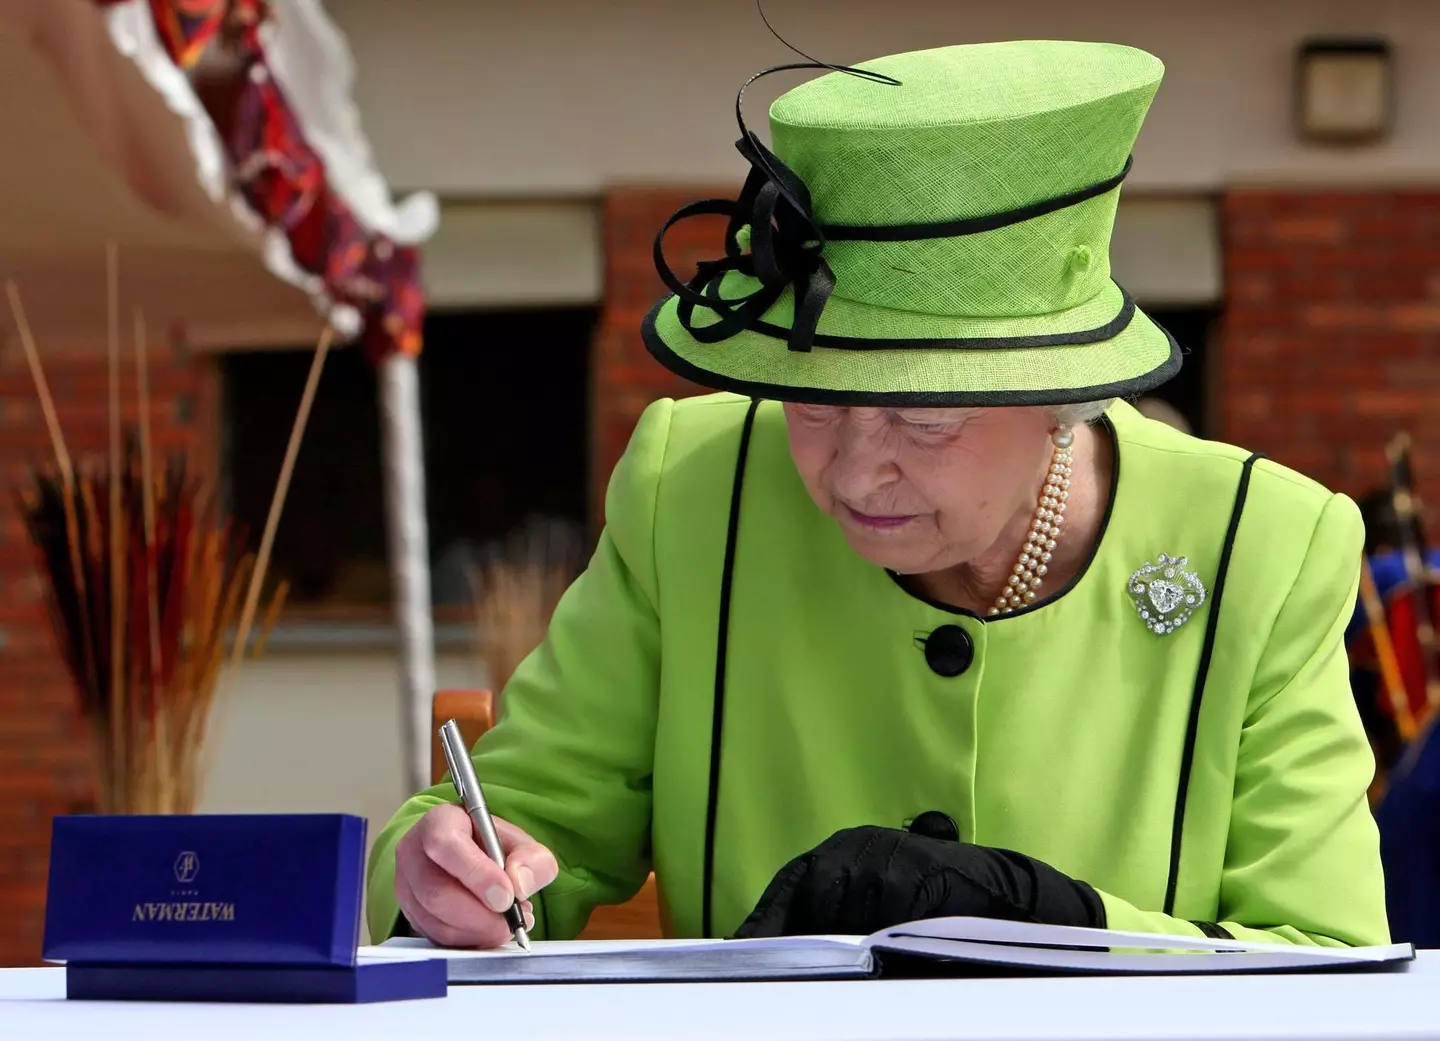 People from all over the world wrote letters to the Queen.